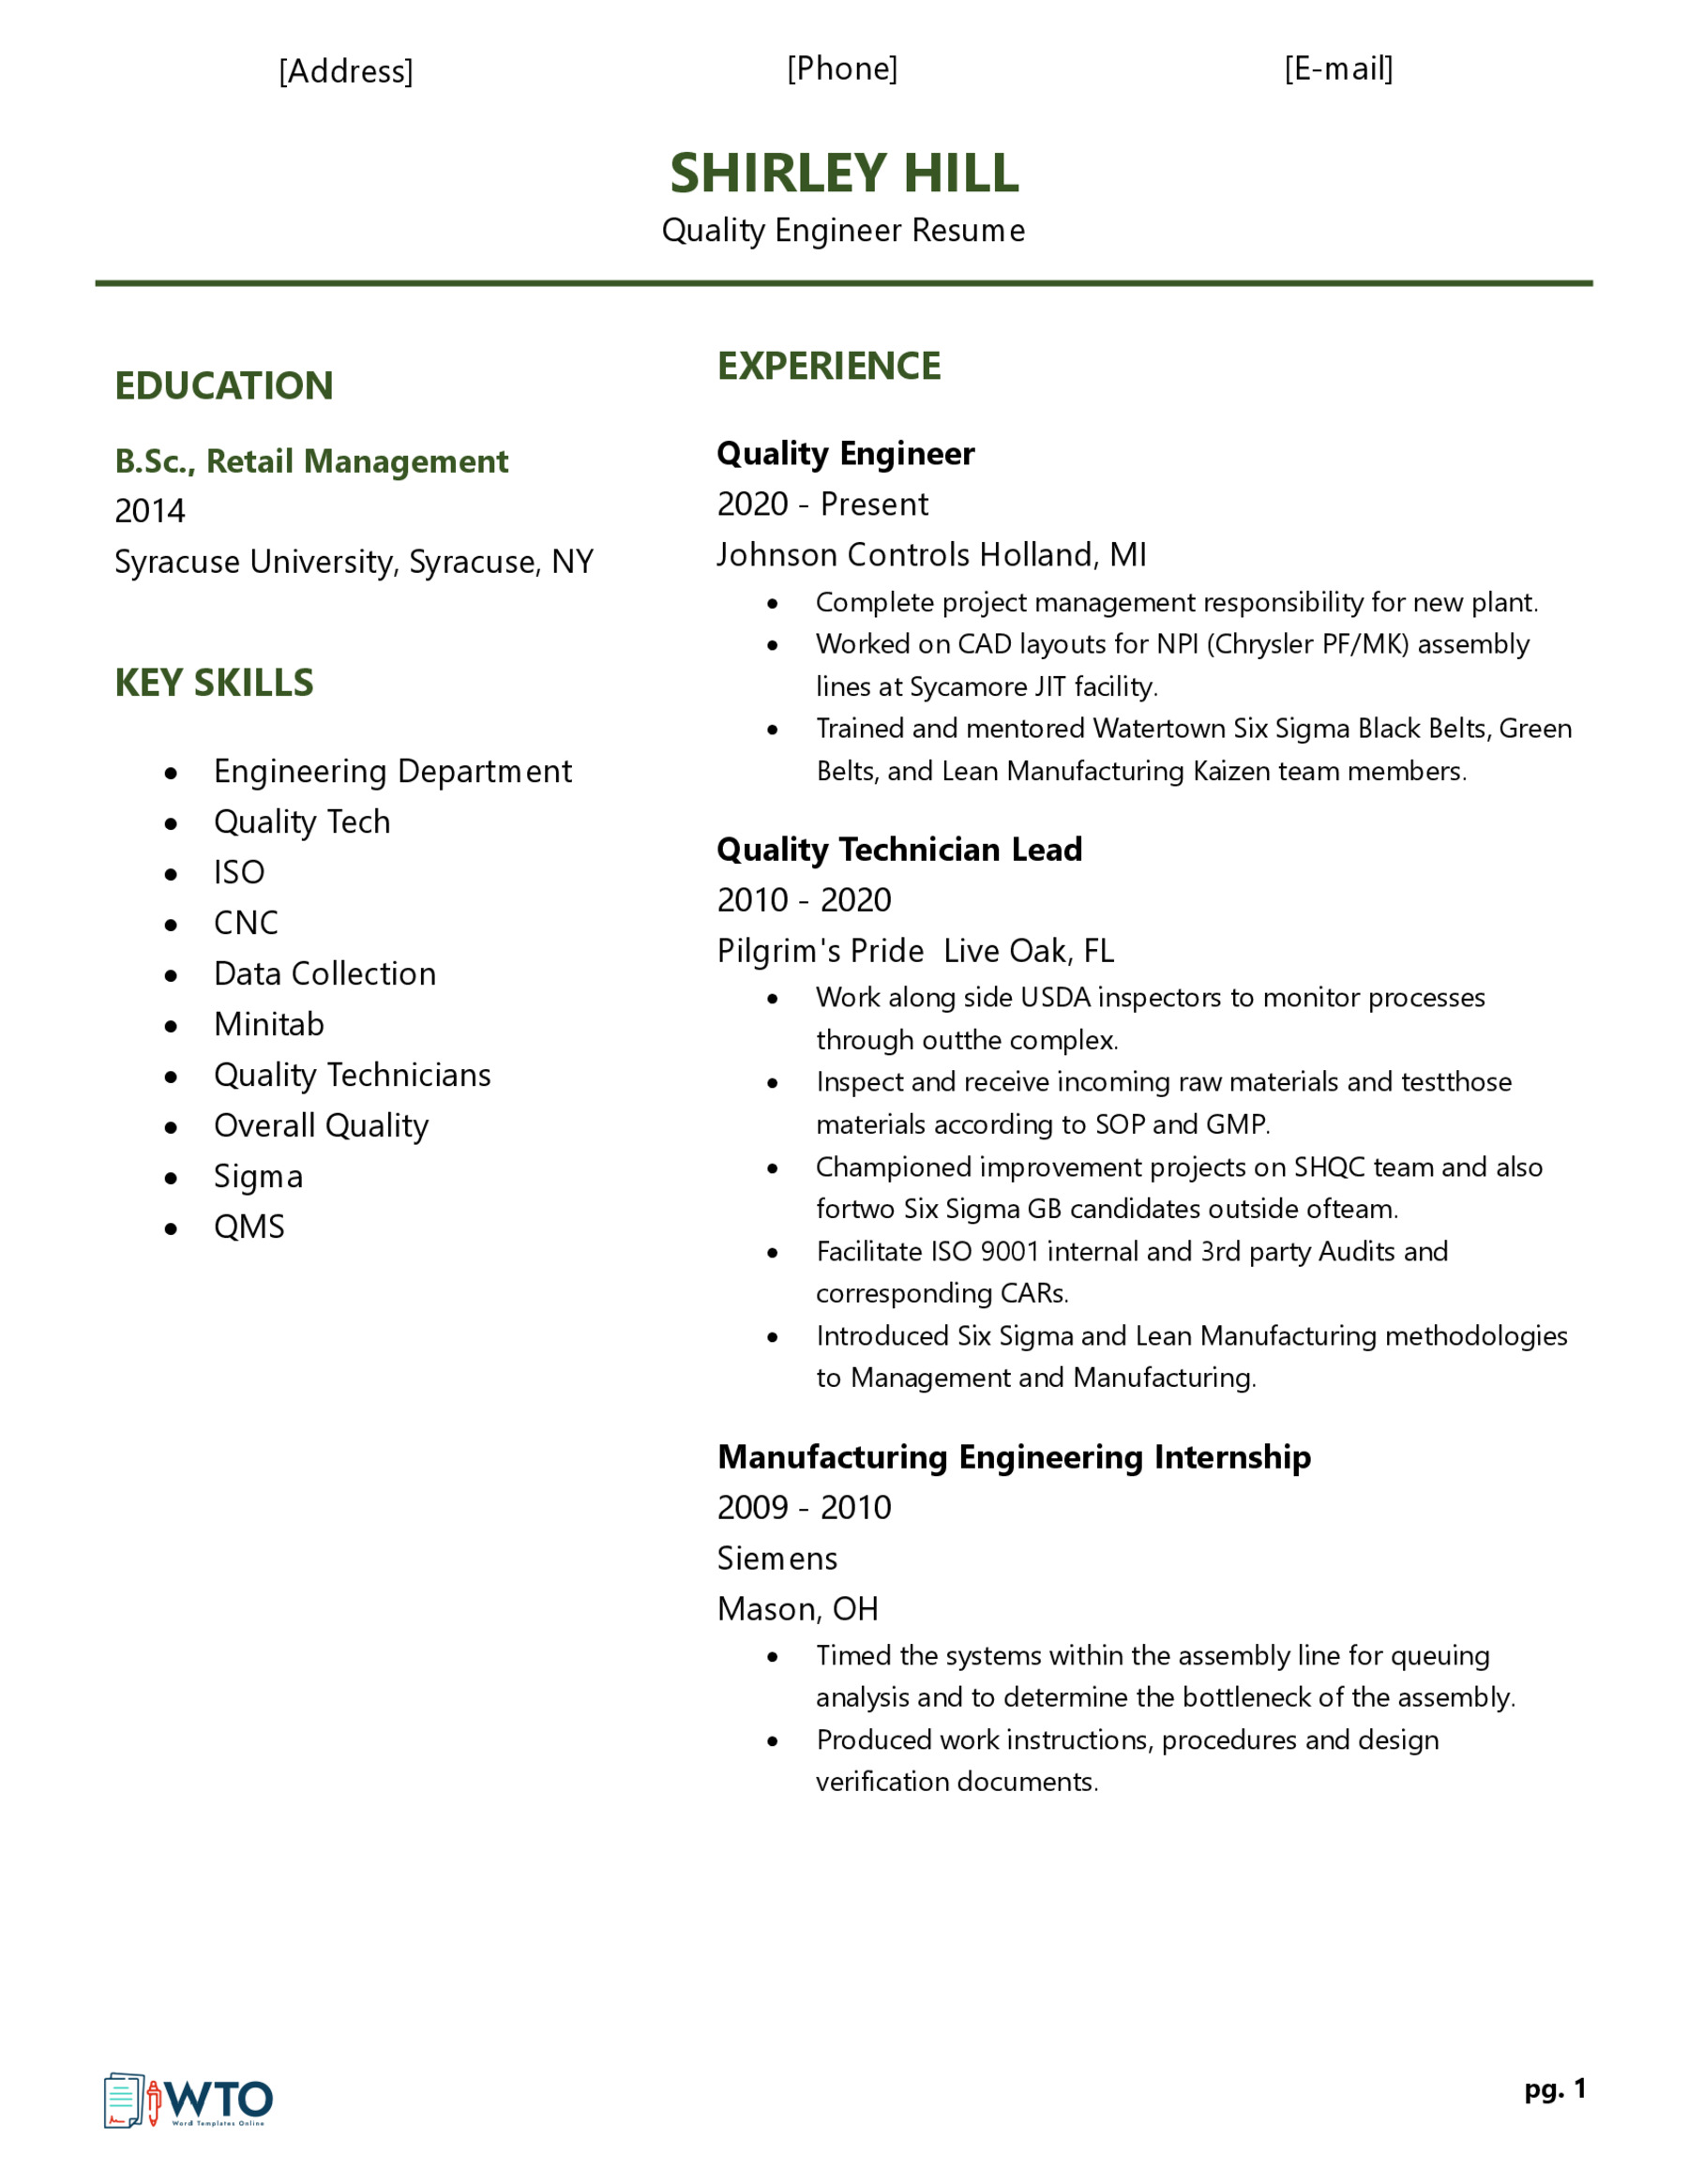 Quality Engineer Resume Template - Ready-to-Use Word Document